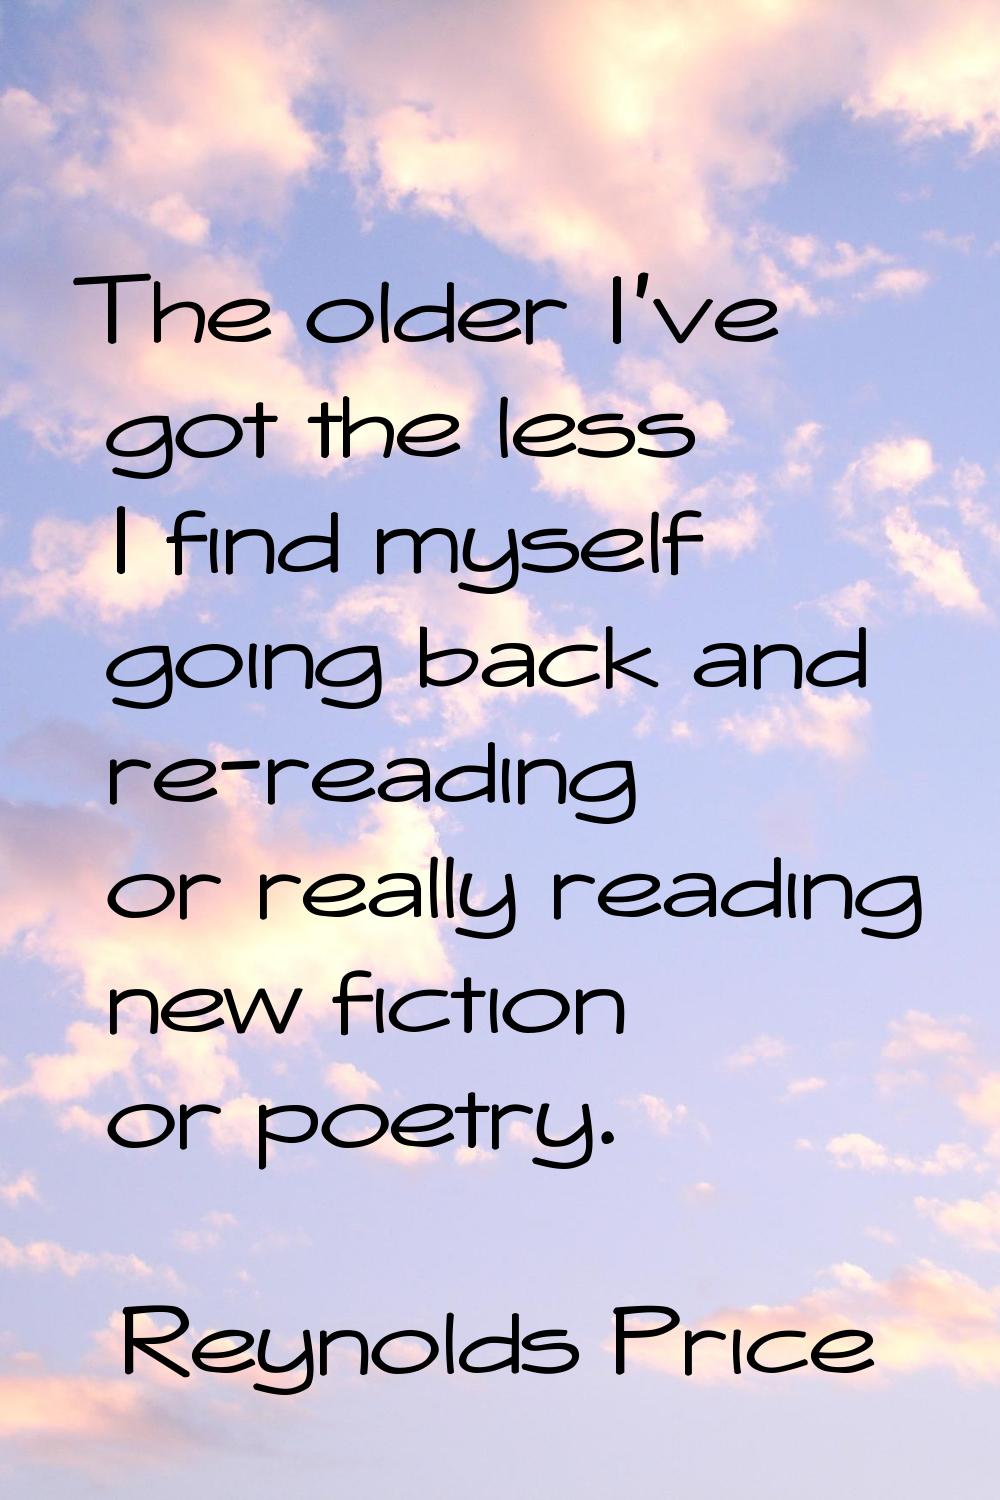 The older I've got the less I find myself going back and re-reading or really reading new fiction o